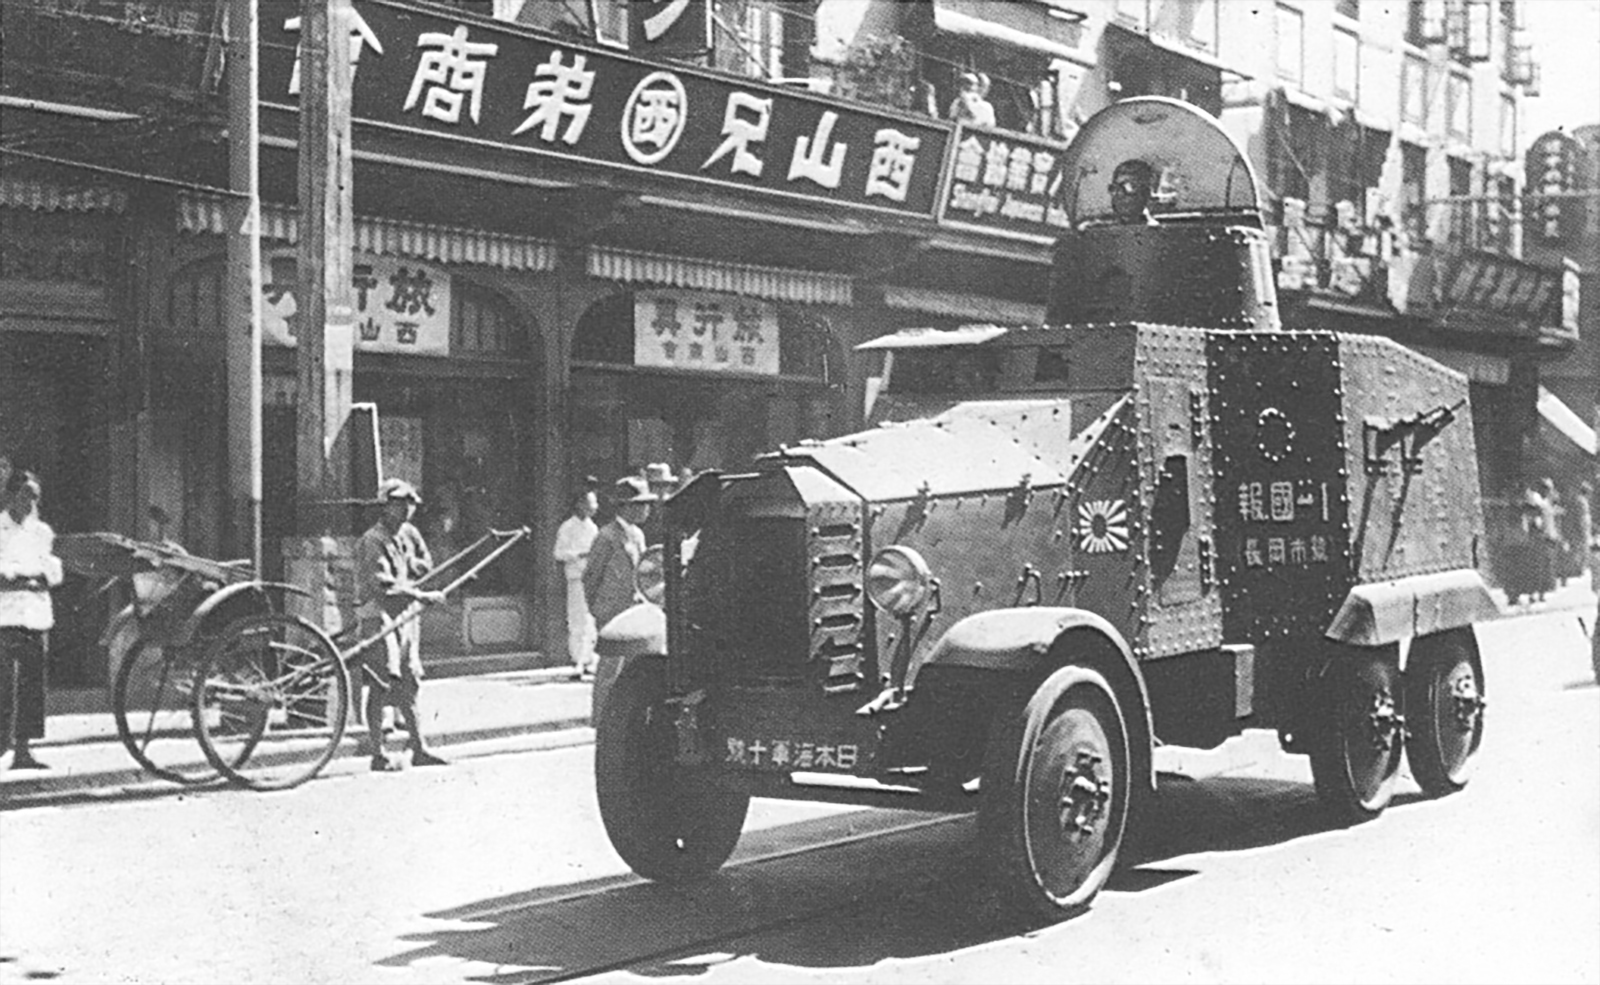 Sumida Model P armored car of Japanese Shanghai Naval Landing Force, Shanghai, China, Jul 1939, photo 2 of 3; note markings noting the vehicle was donated by citizens of Nagaoka city of Niigata Prefecture, Japan